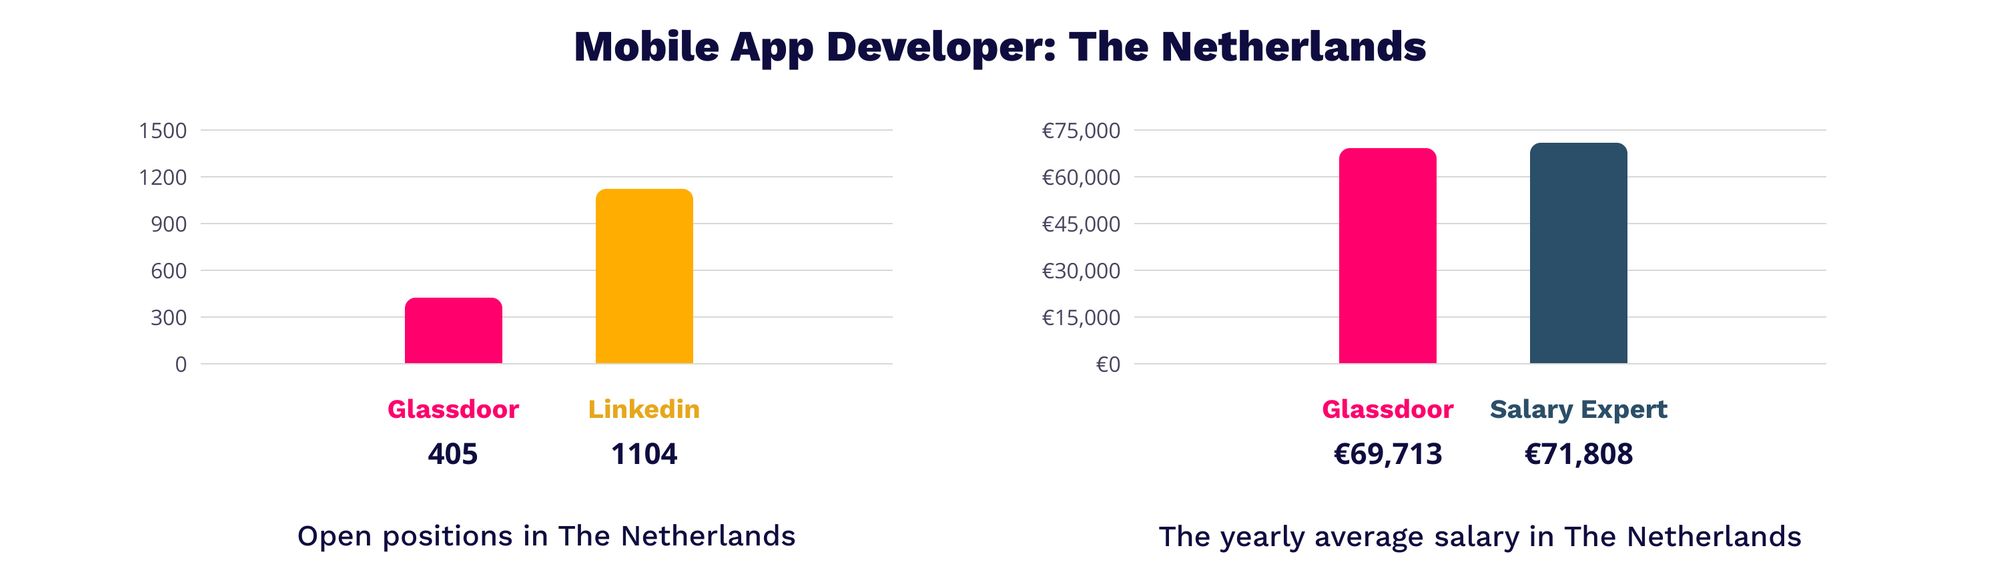 Mobile app developer salary - IT Jobs in The Netherlands | MagicHire.co